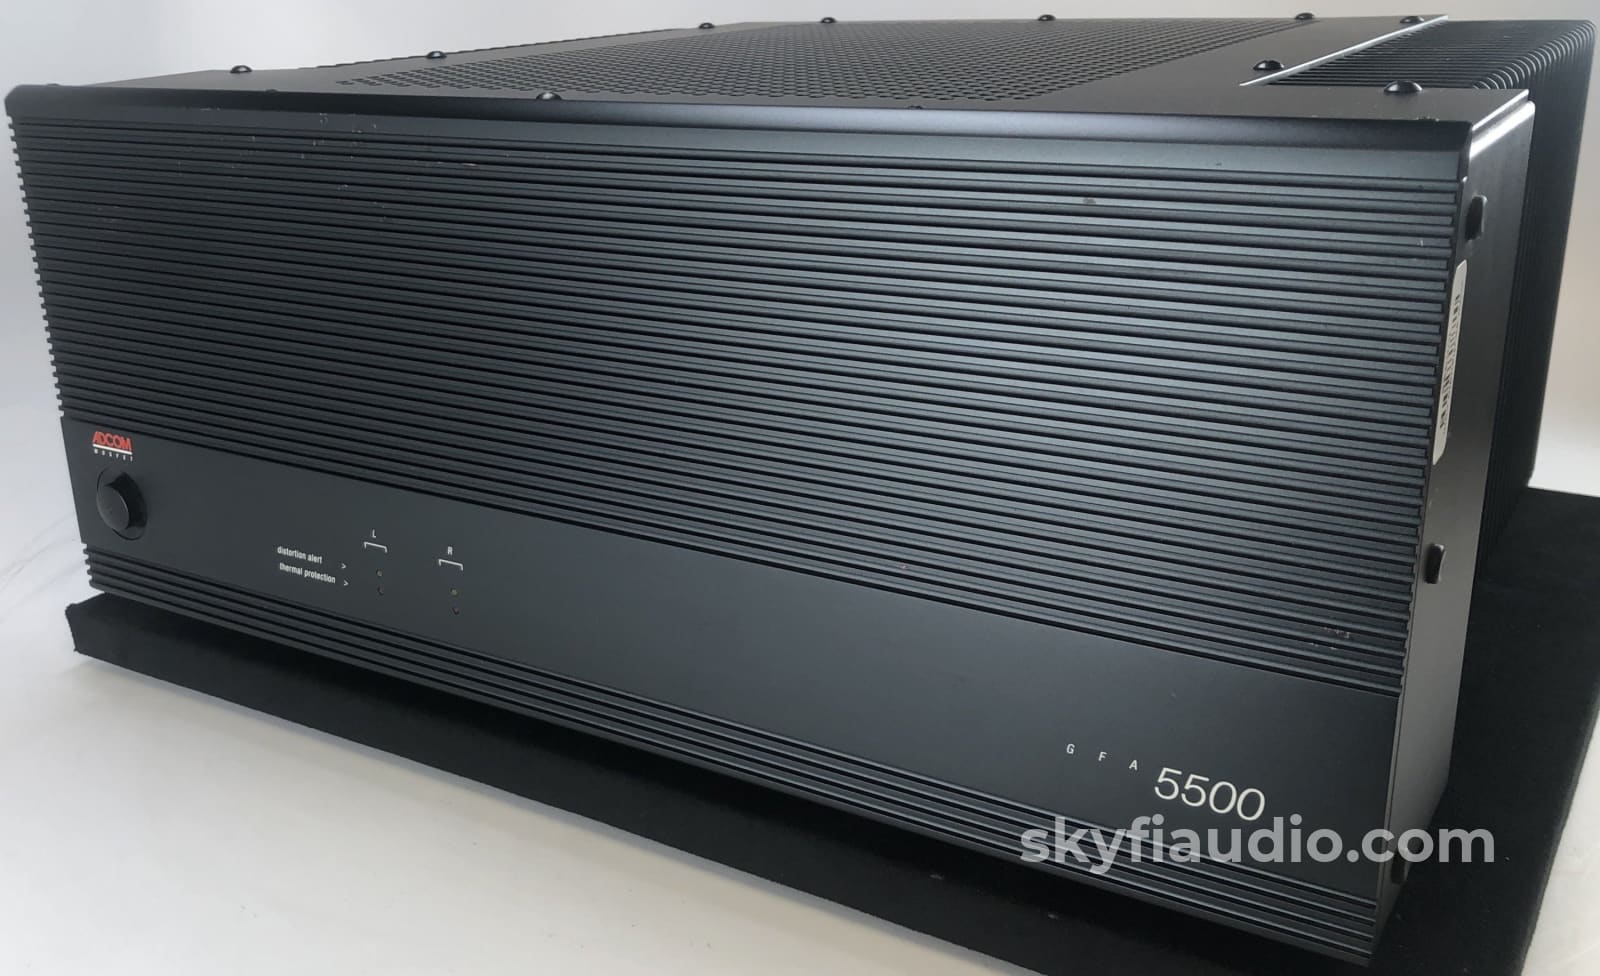 Adcom Gfa-5500 Amplifier With 200 Watts Per Channel